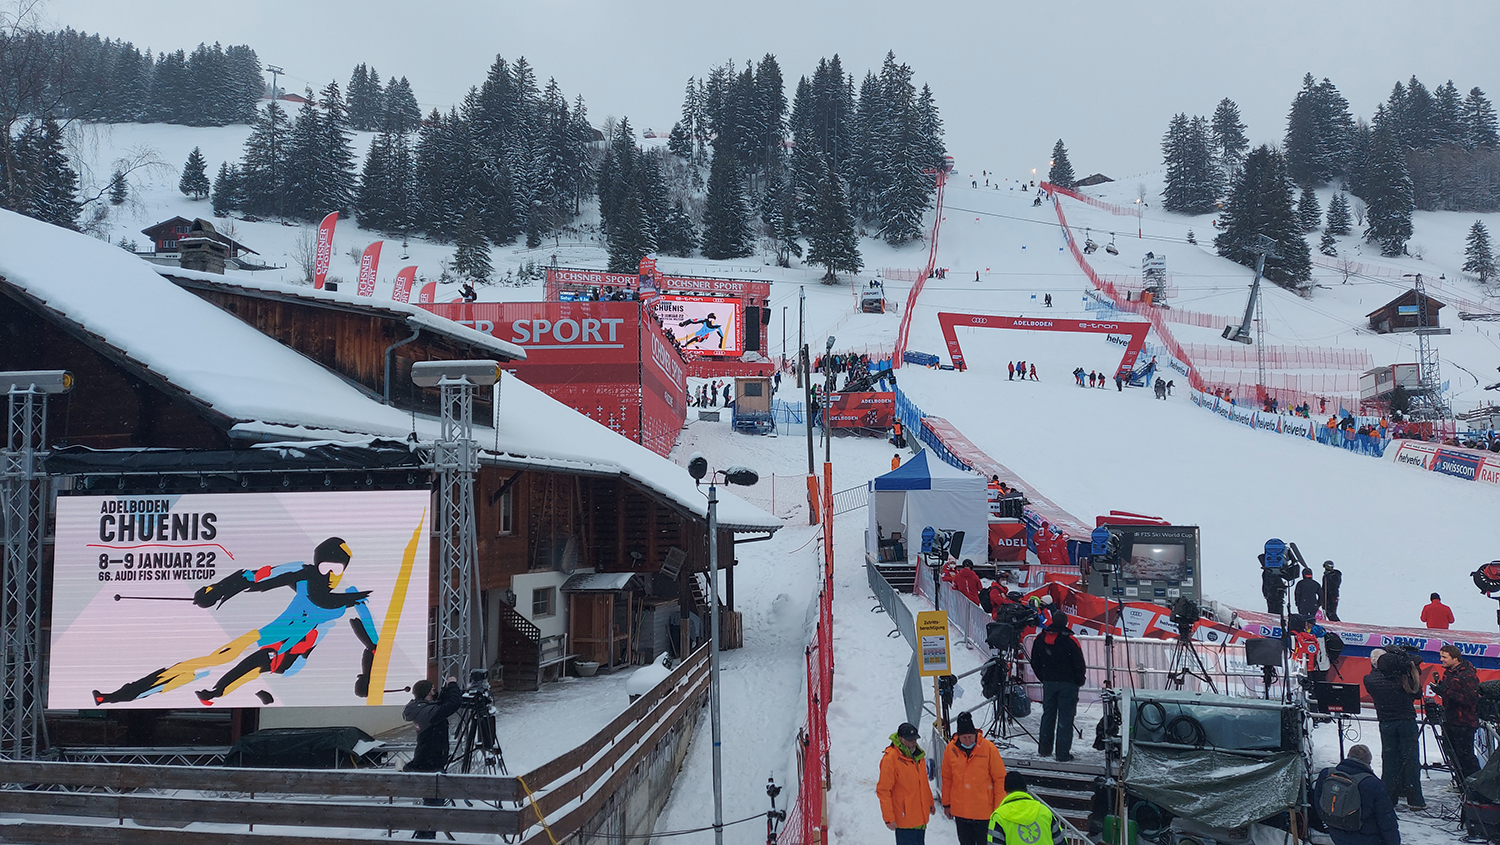 LED Wand am FIS Ski Weltcup in Adelboden